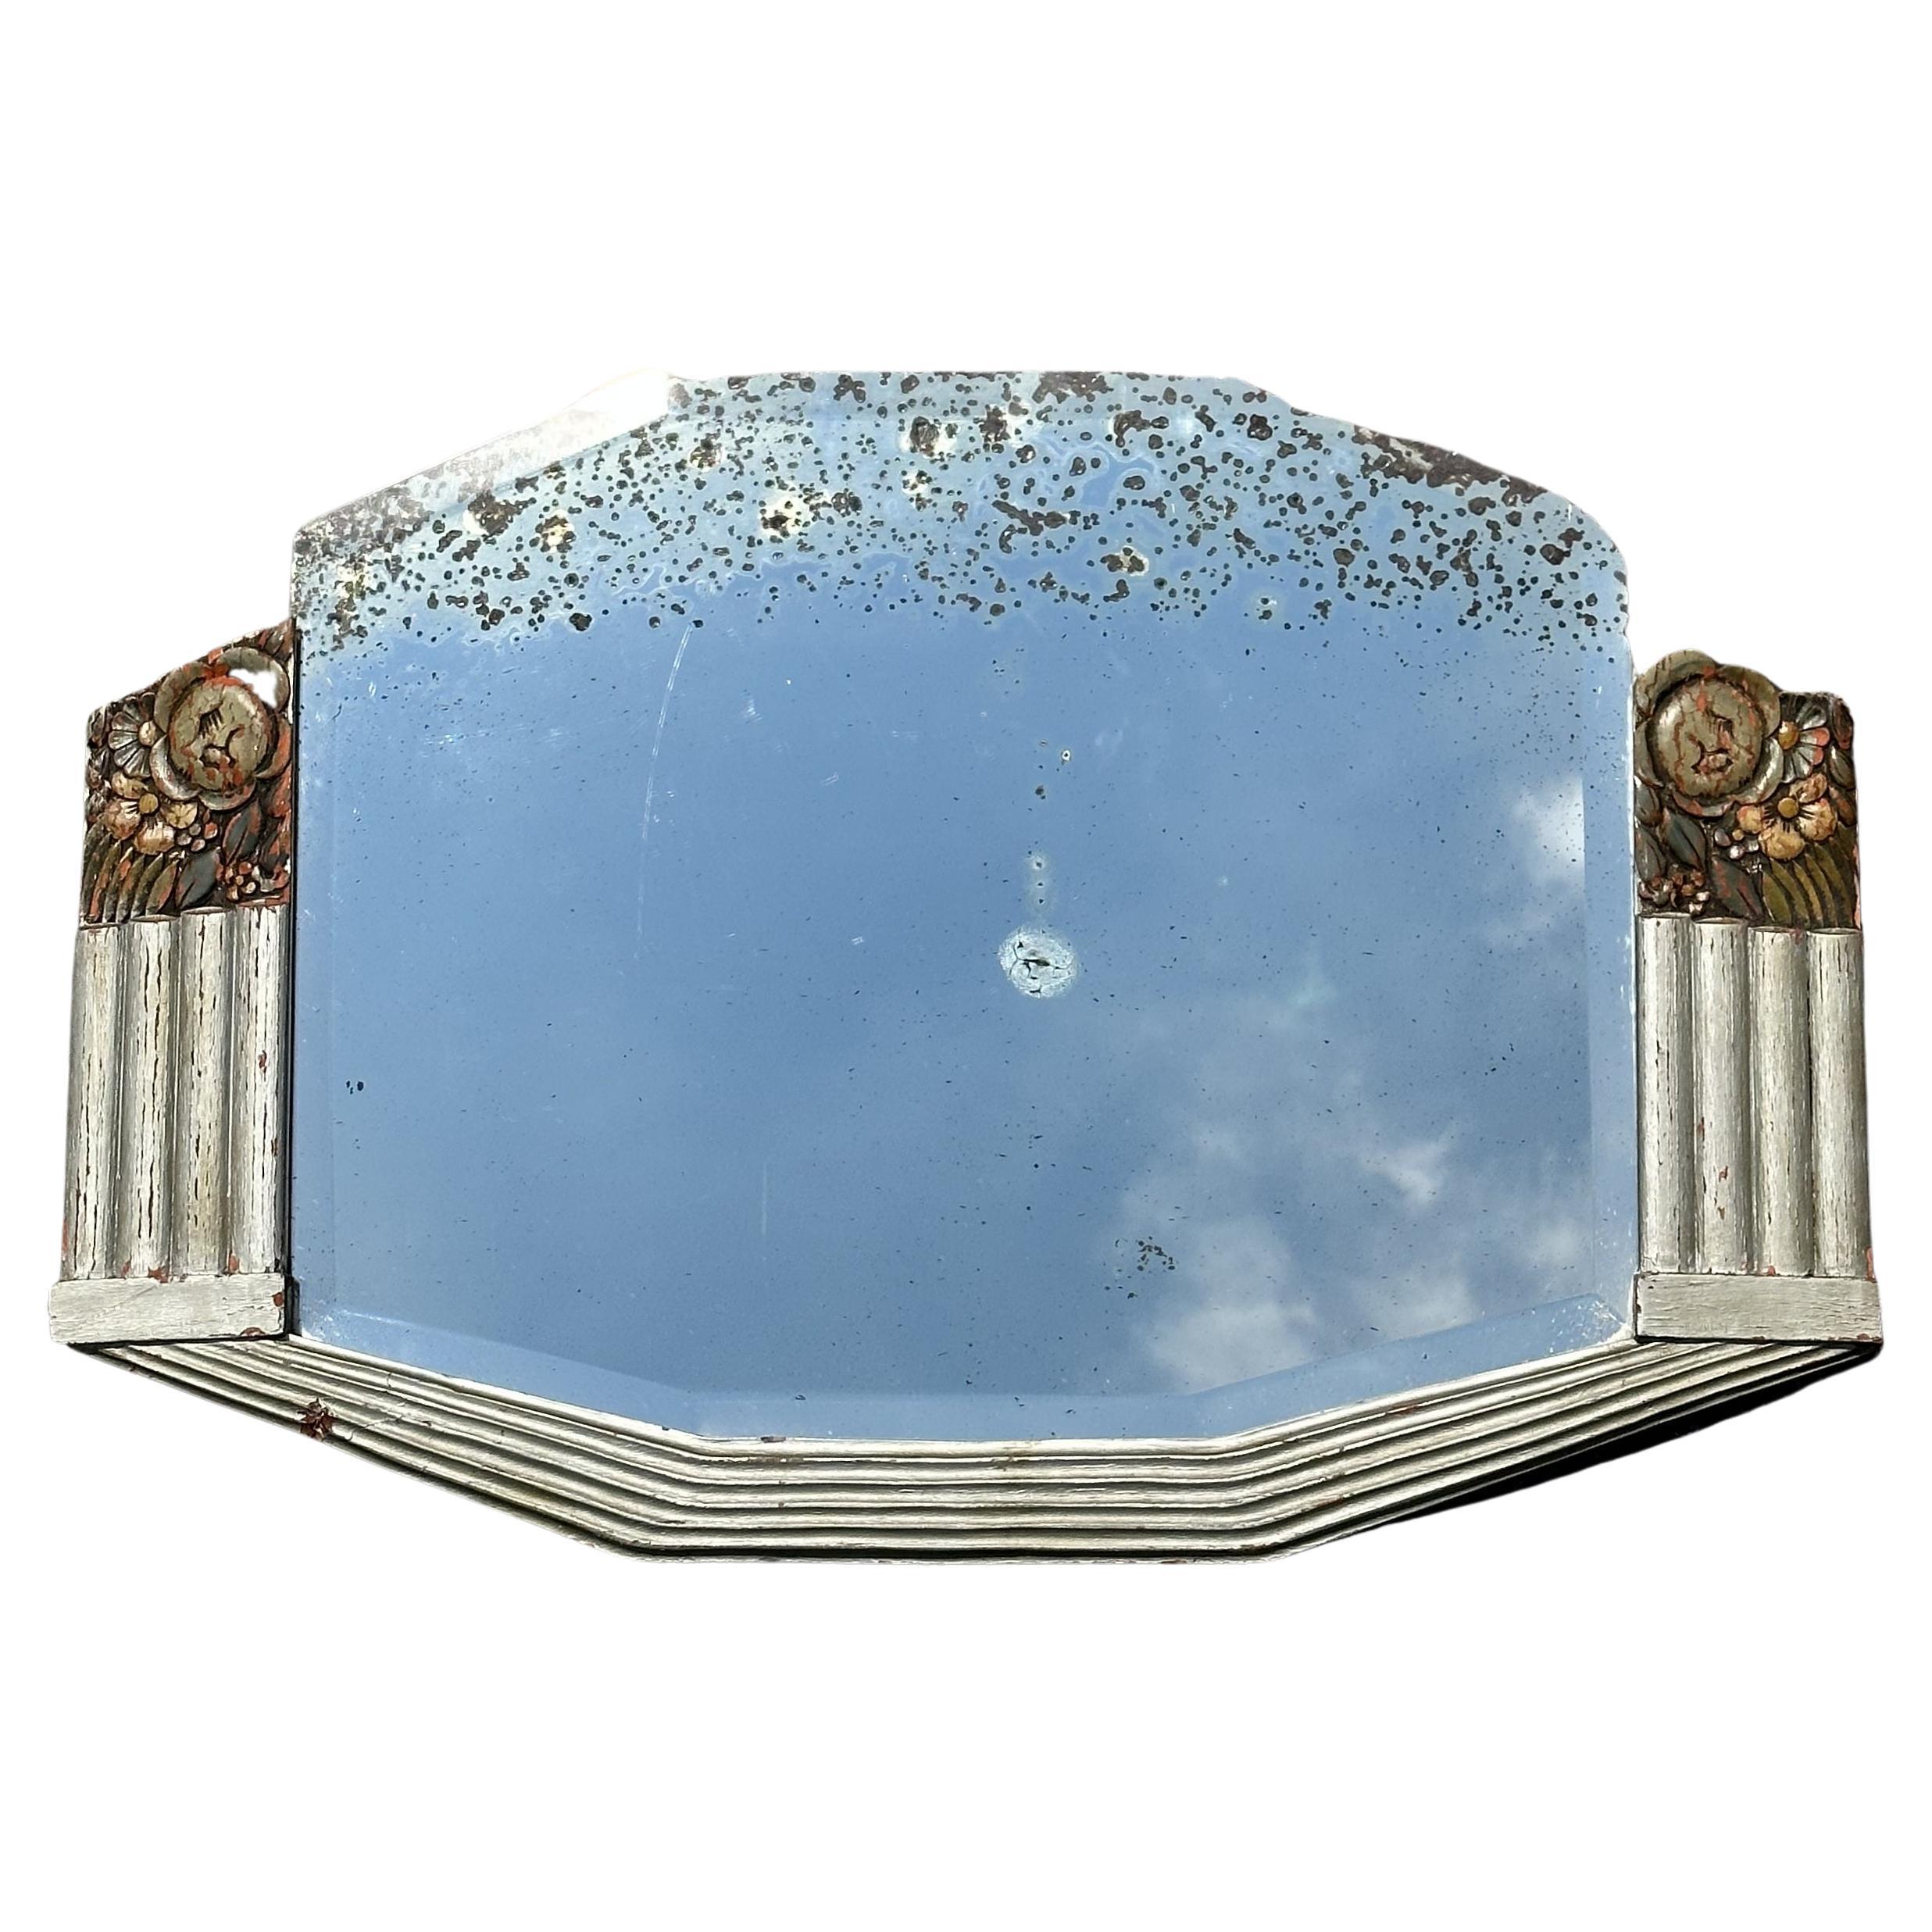 Sublime Antique 1920s Art Deco New York Fan Mirror with Heavily Foxed Plate For Sale